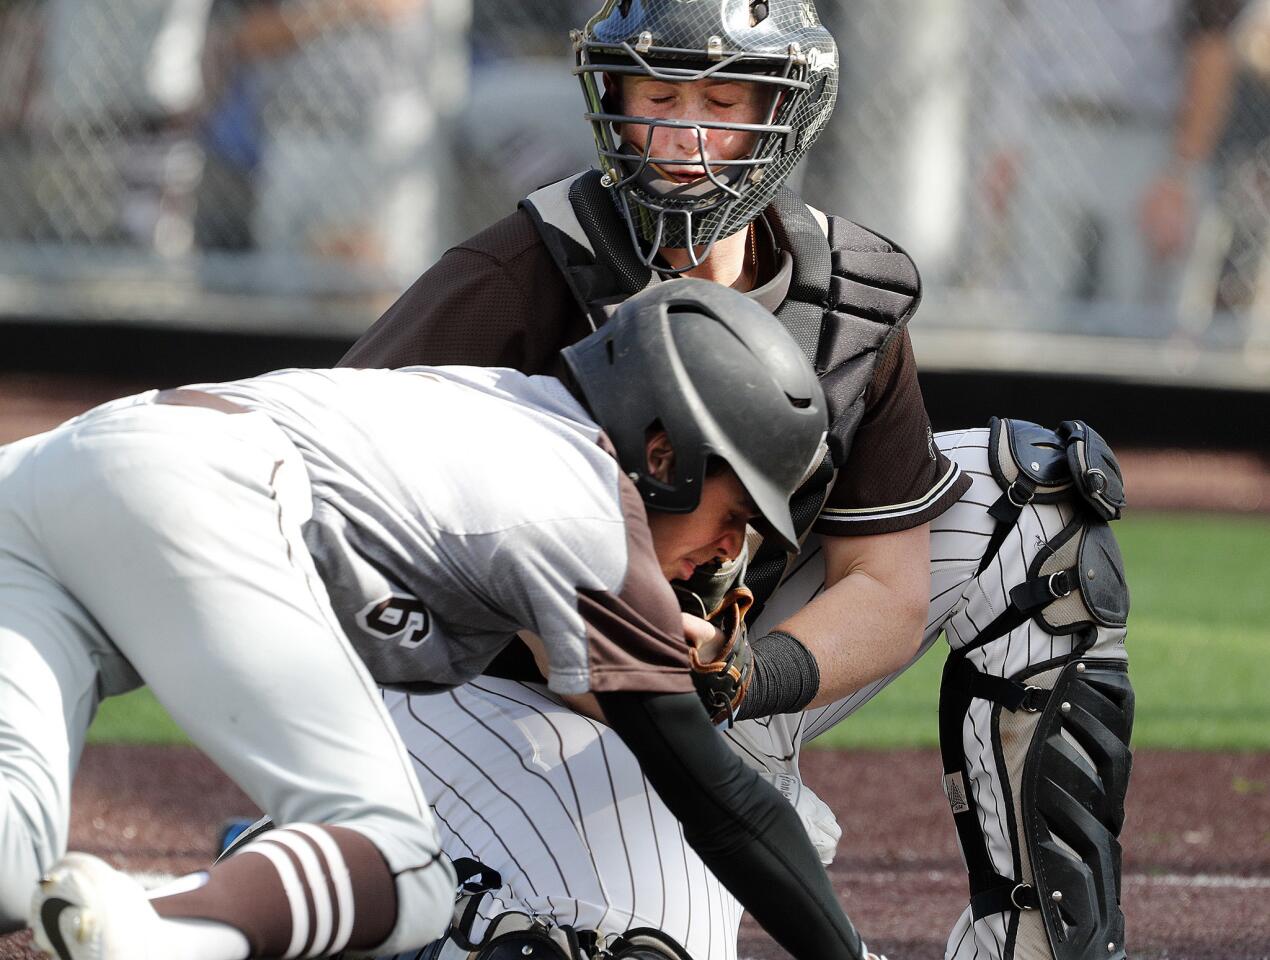 St. Francis' catcher Brendan Durfee prepares for Crespi's Parker Smith to drive hard into him to attempt to knock the ball free to score in a Mission League baseball game at the Glendale Sports Complex on Wednesday, March 27, 2019. Durfee held on, and Smith was out.